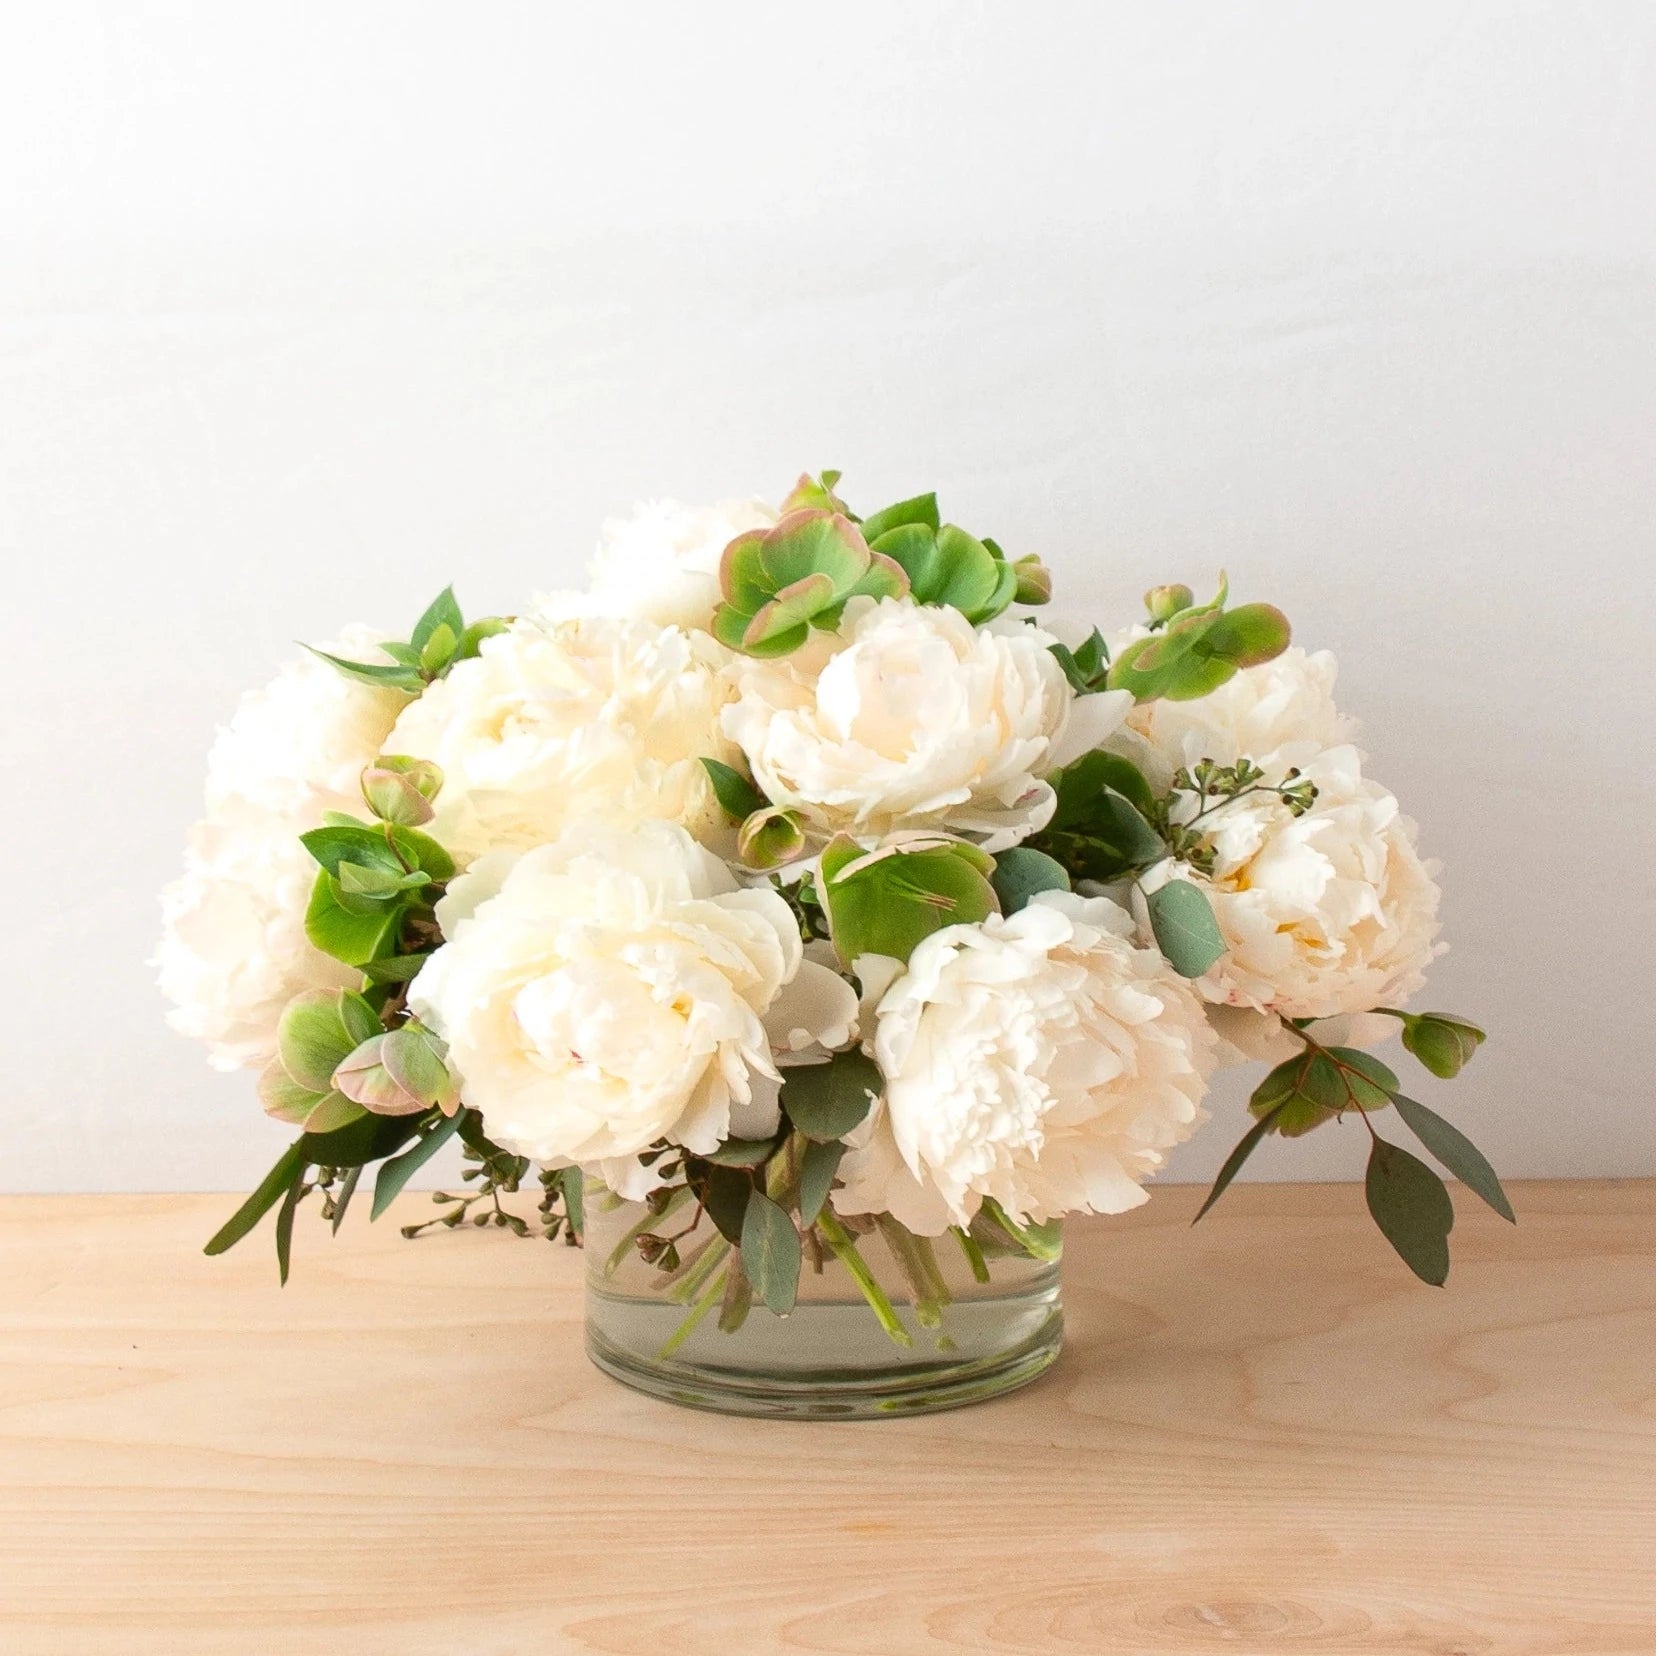 Our Classy Peonies arrangement features a luscious vase of Cream peonies and is made with luxury, richness, and elegance. Hellebores and seeded eucalyptus are accented in a clear glass vase.